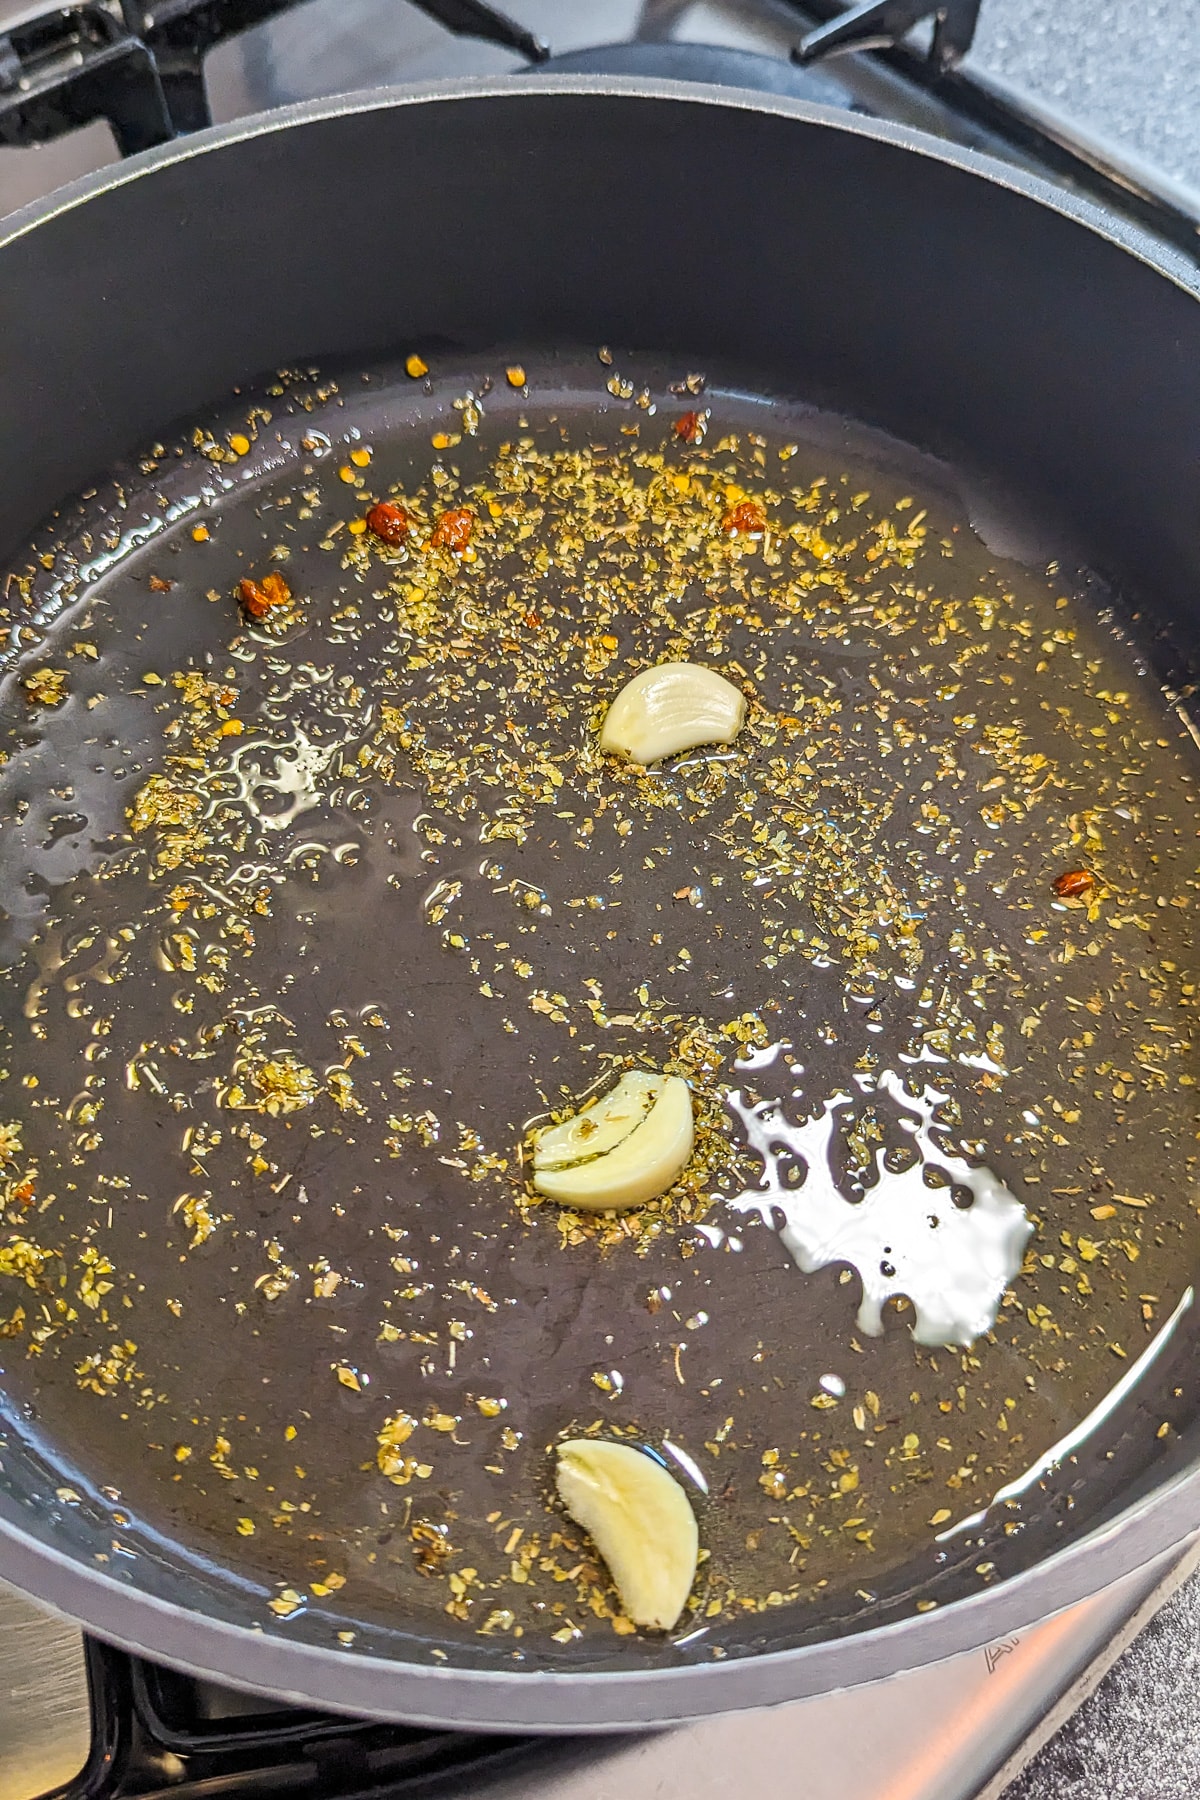 A pan with oil flavored with garlic, dried oregano and black pepper.